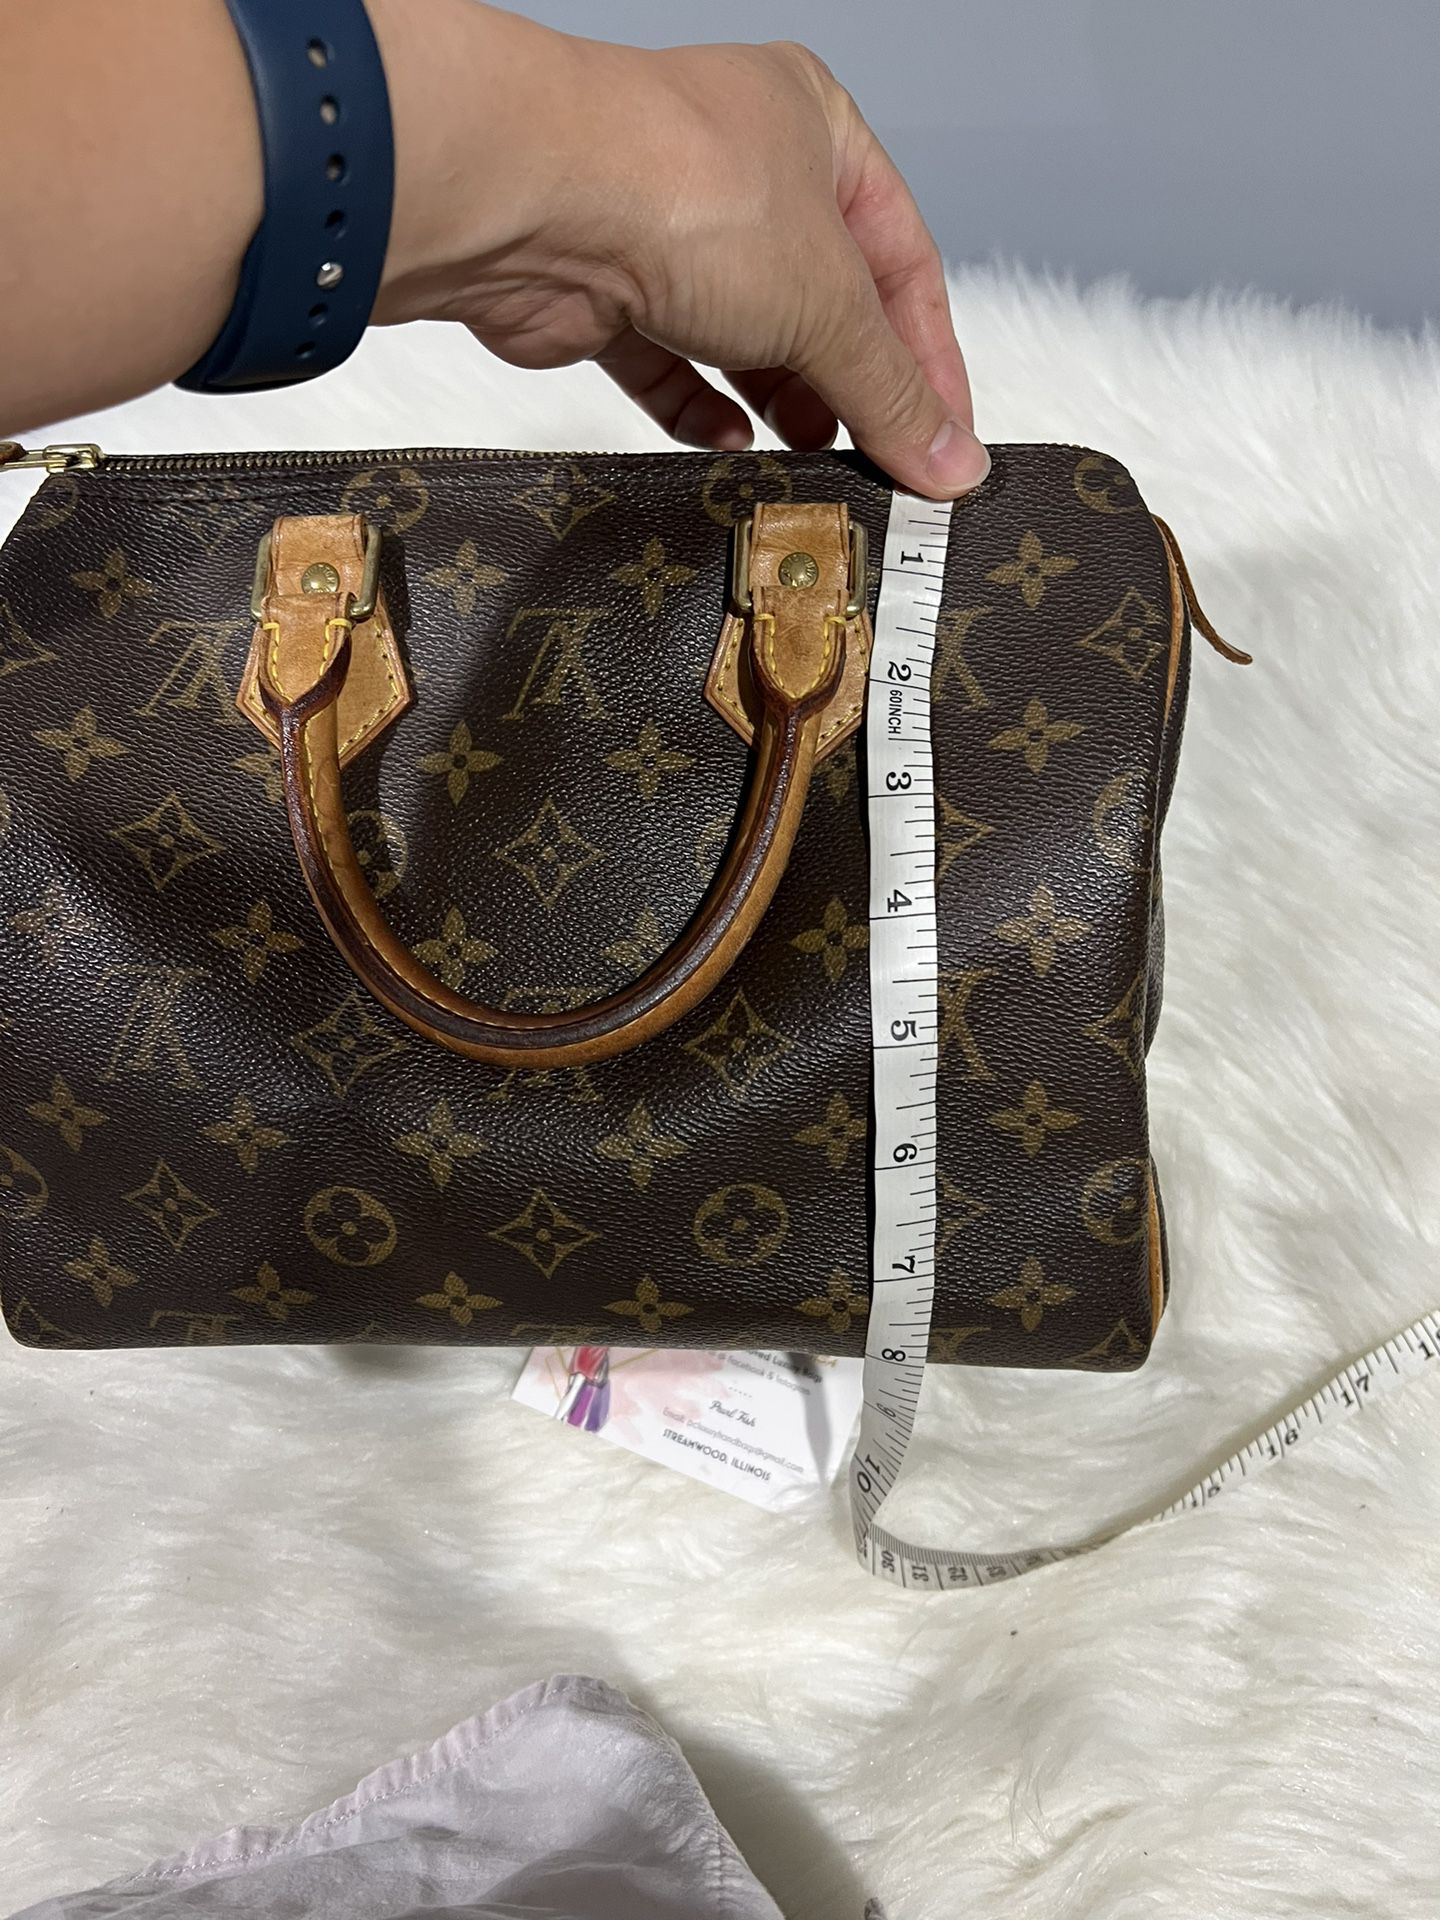 Authentic Louis Vuitton Speedy 25 With Strap for Sale in Corpus Christi, TX  - OfferUp